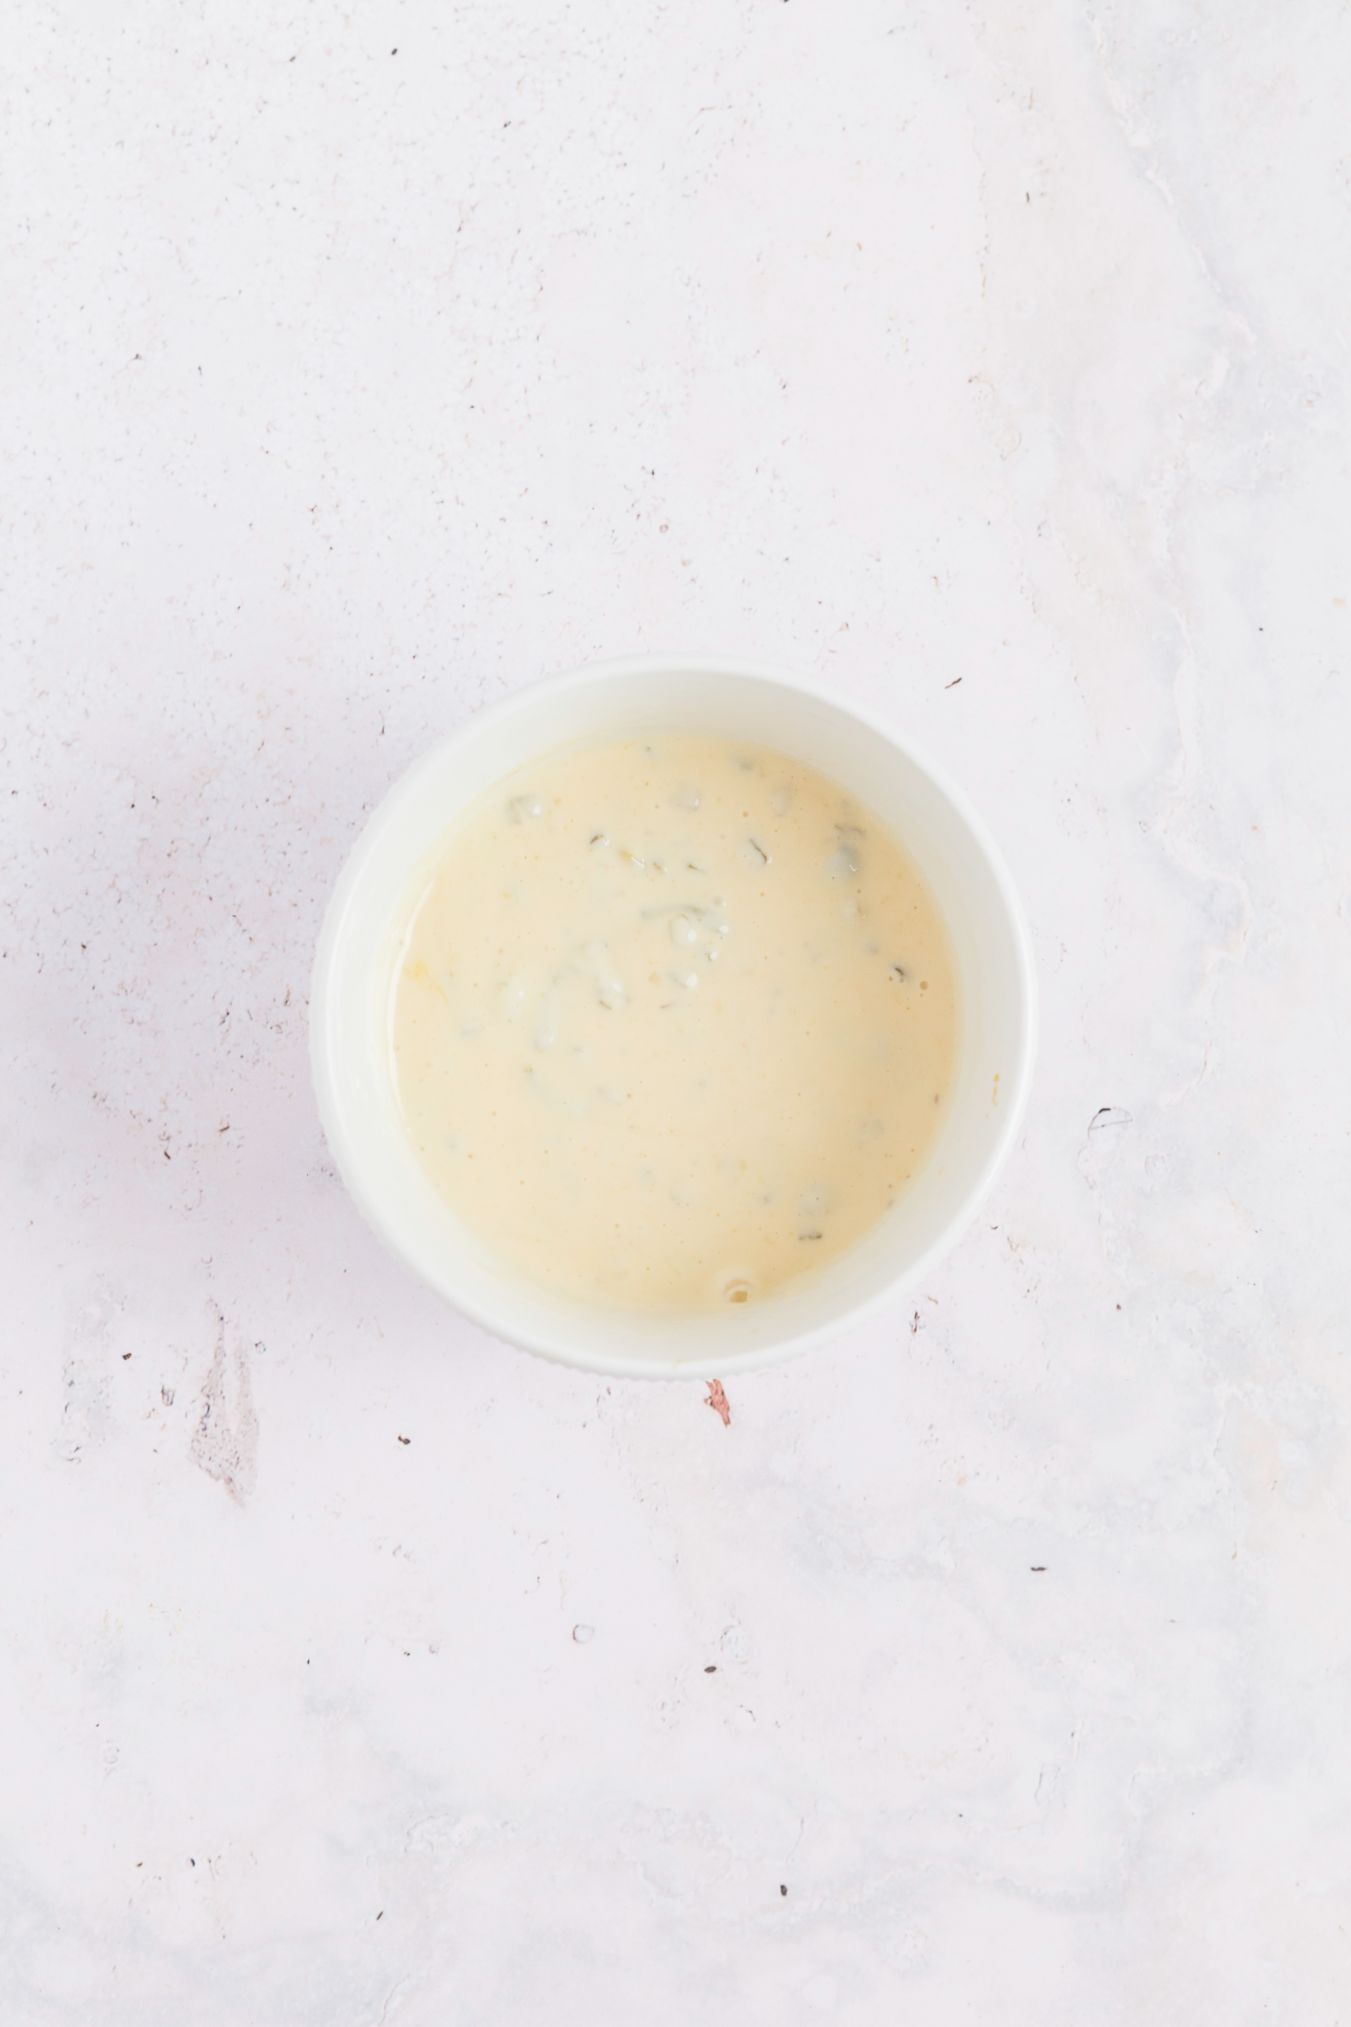 Macaroni salad dressing mixed together in a small white bowl